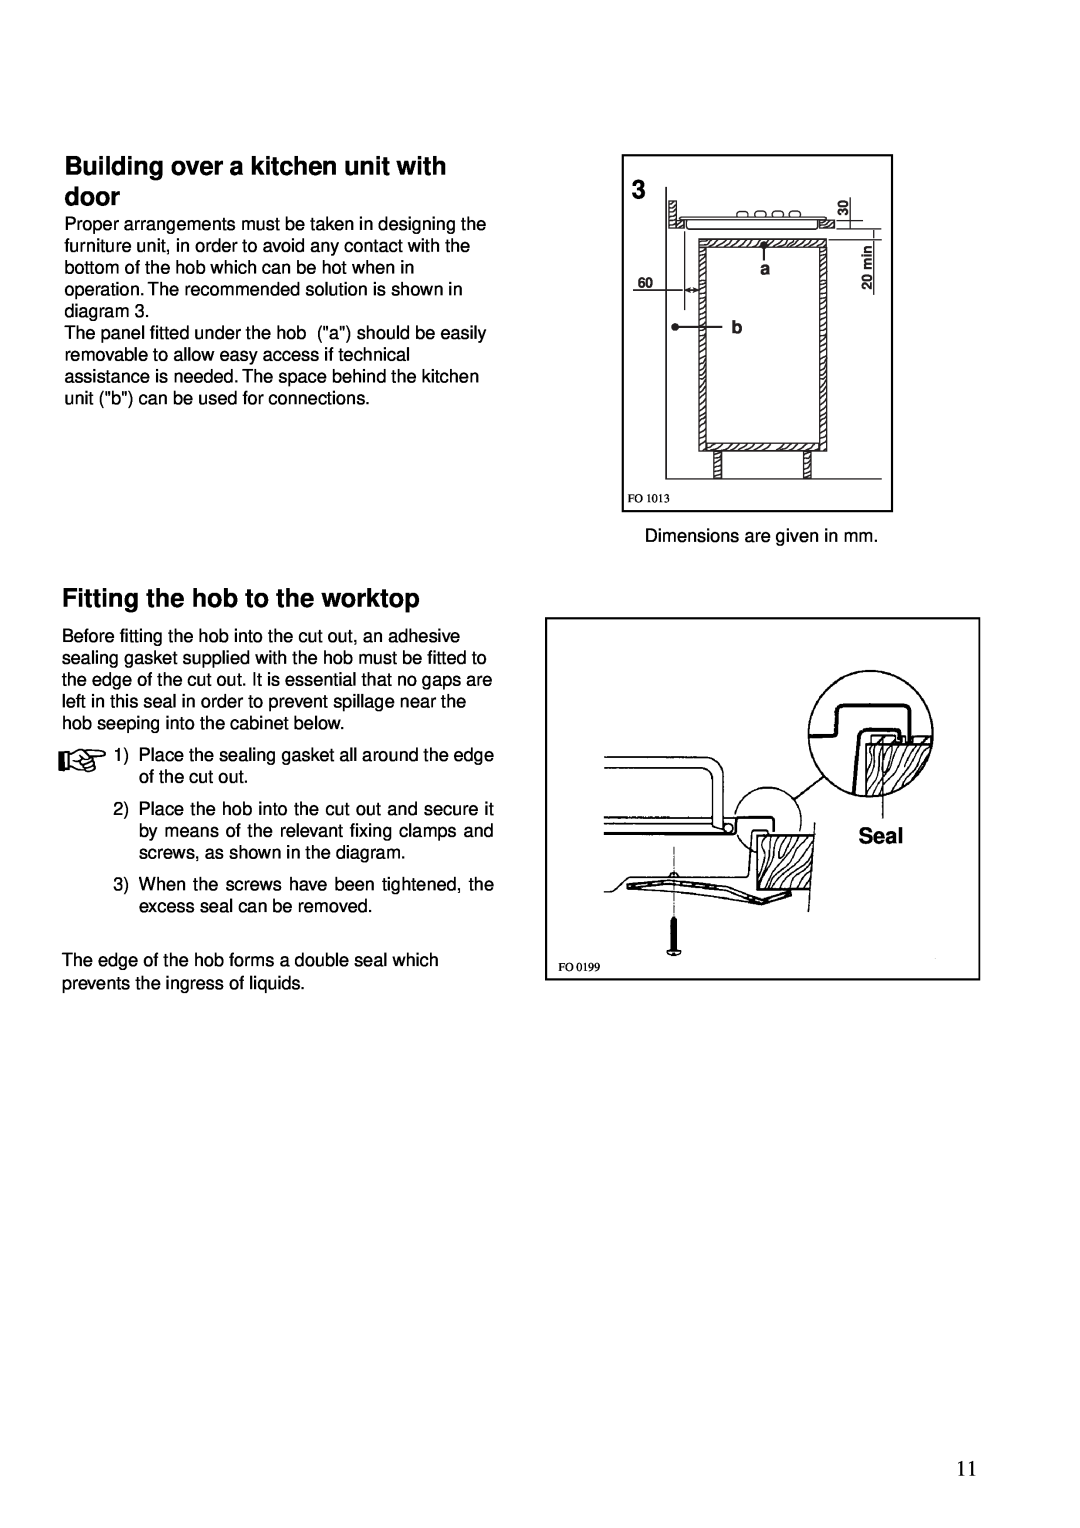 Zanussi Cook Plate manual Building over a kitchen unit with door, Fitting the hob to the worktop, Seal 